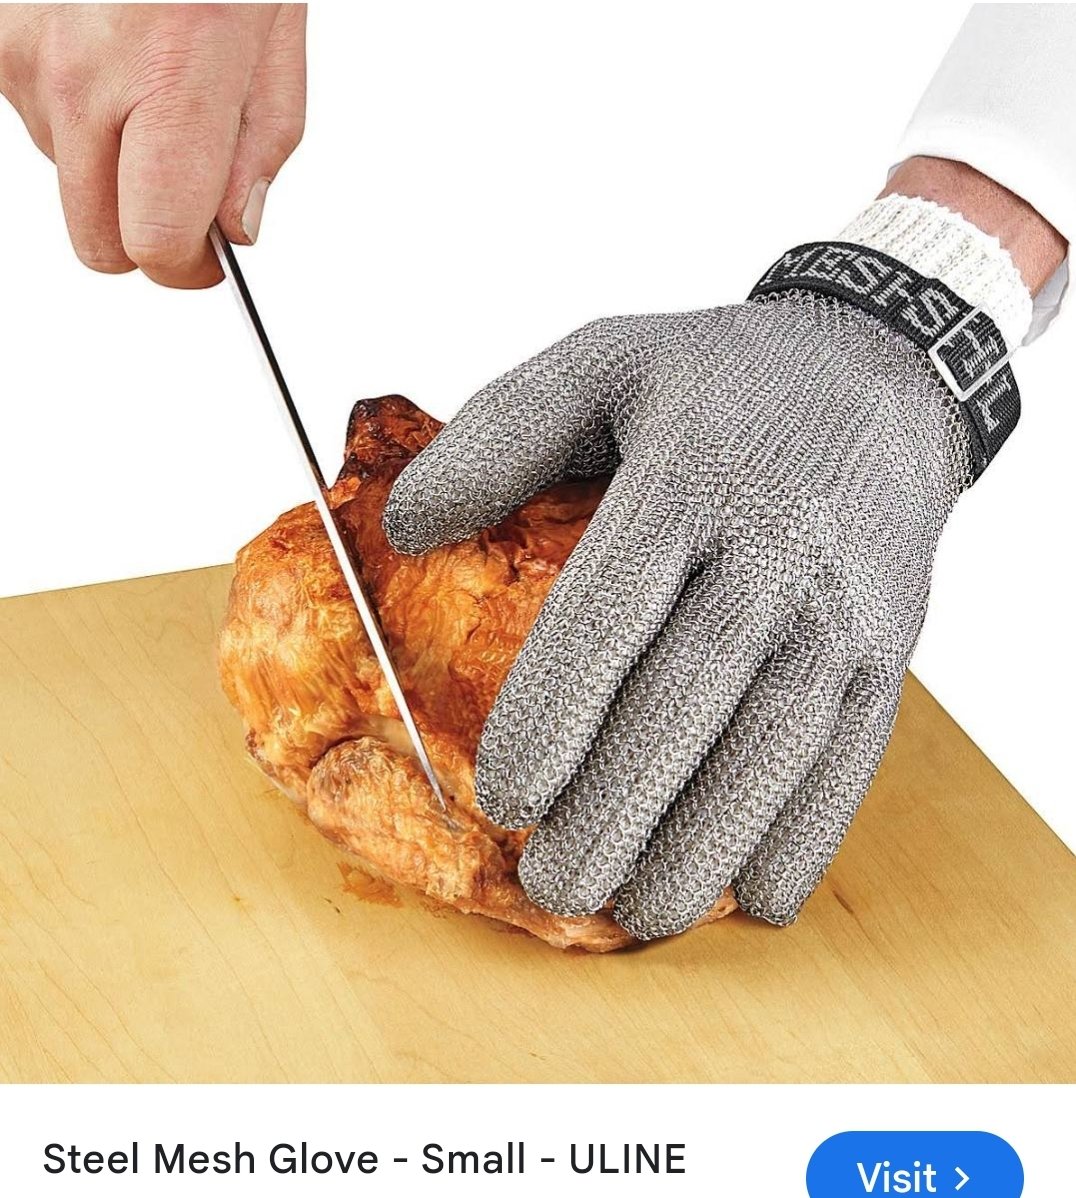 @WmDeanFrench You need one of these butcher gloves!!